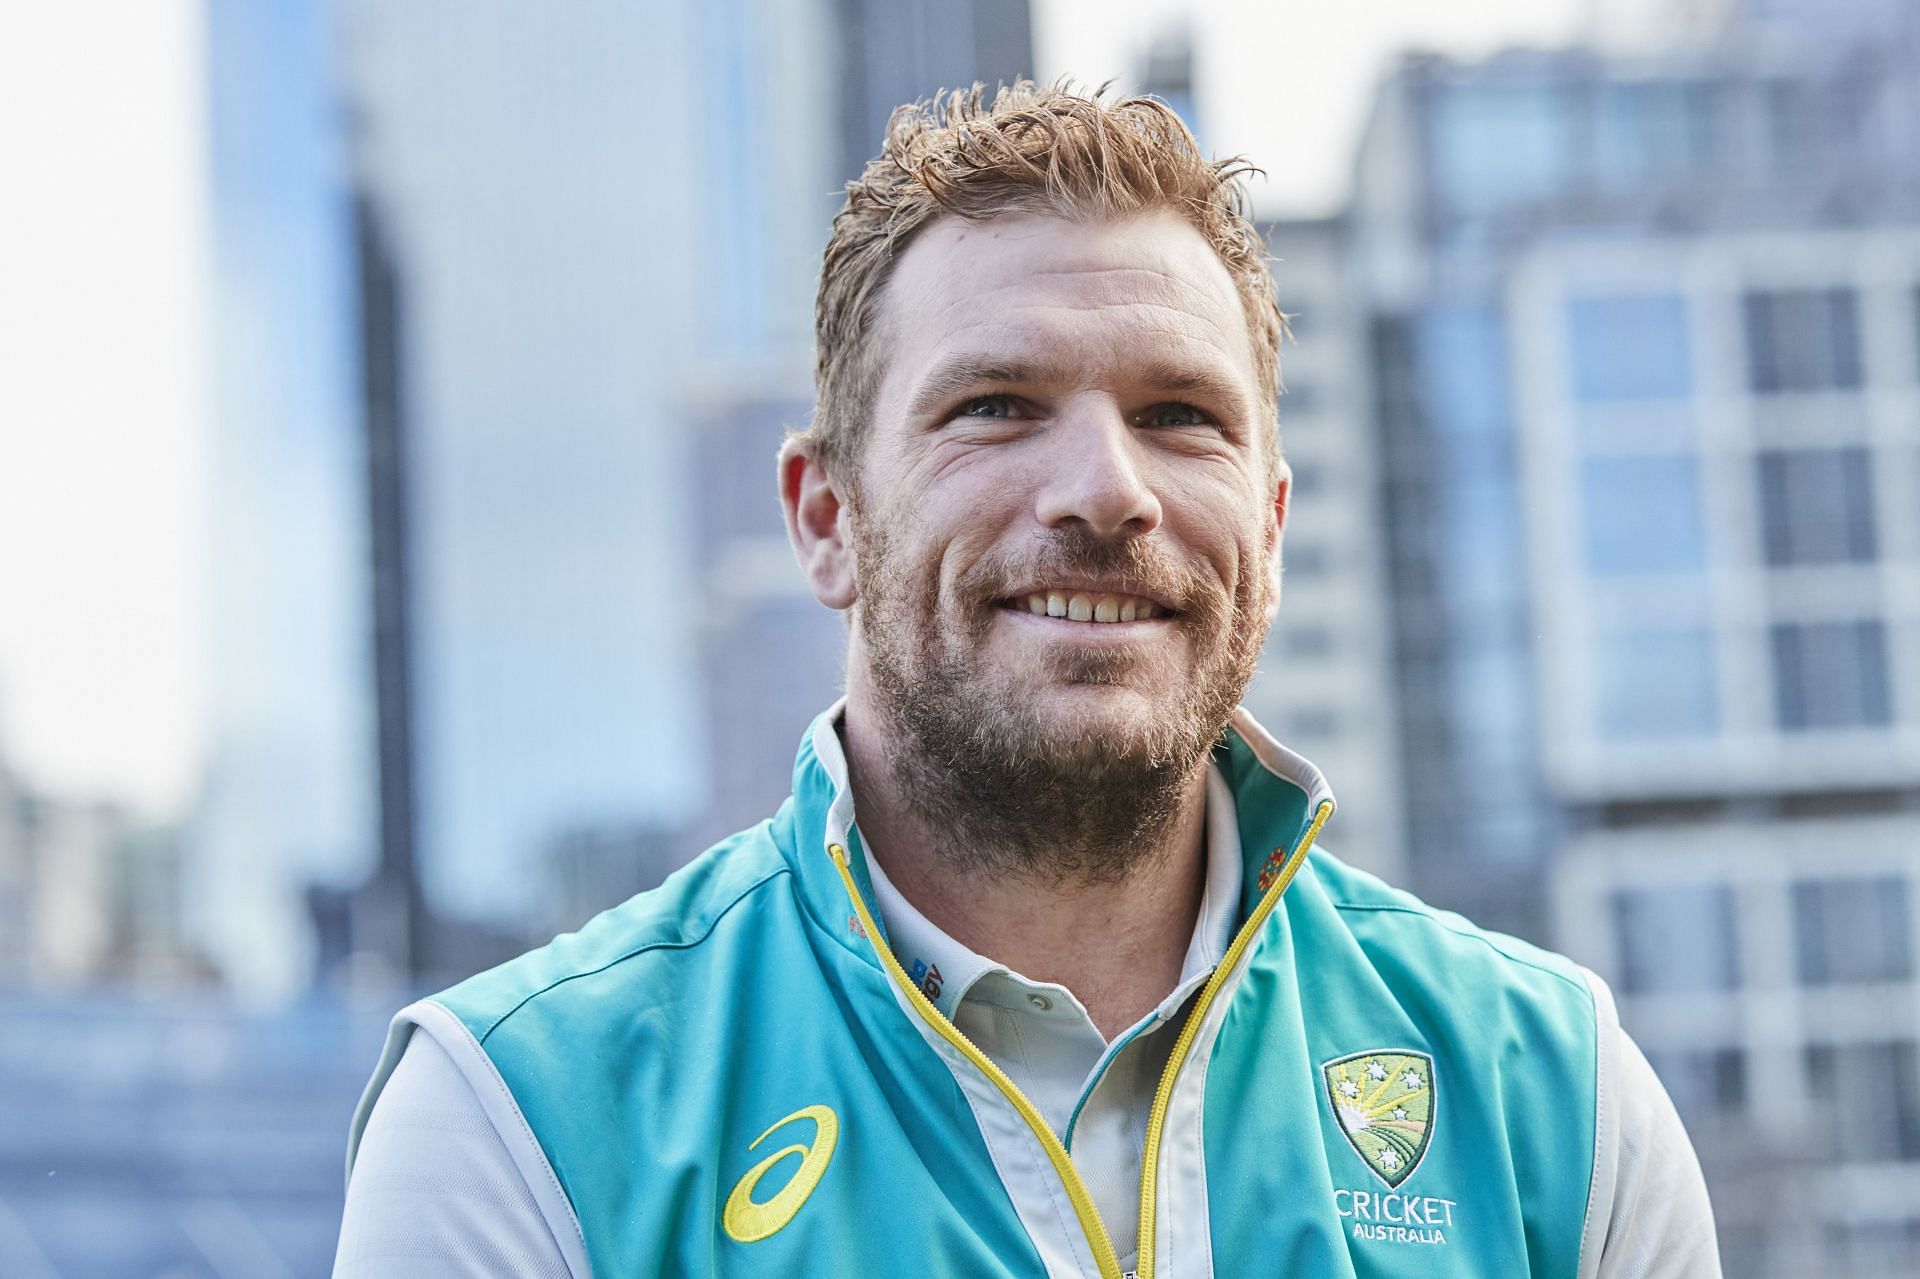 T20 World Cup 2022: Aaron Finch hints retirement after T20 World Cup 2022